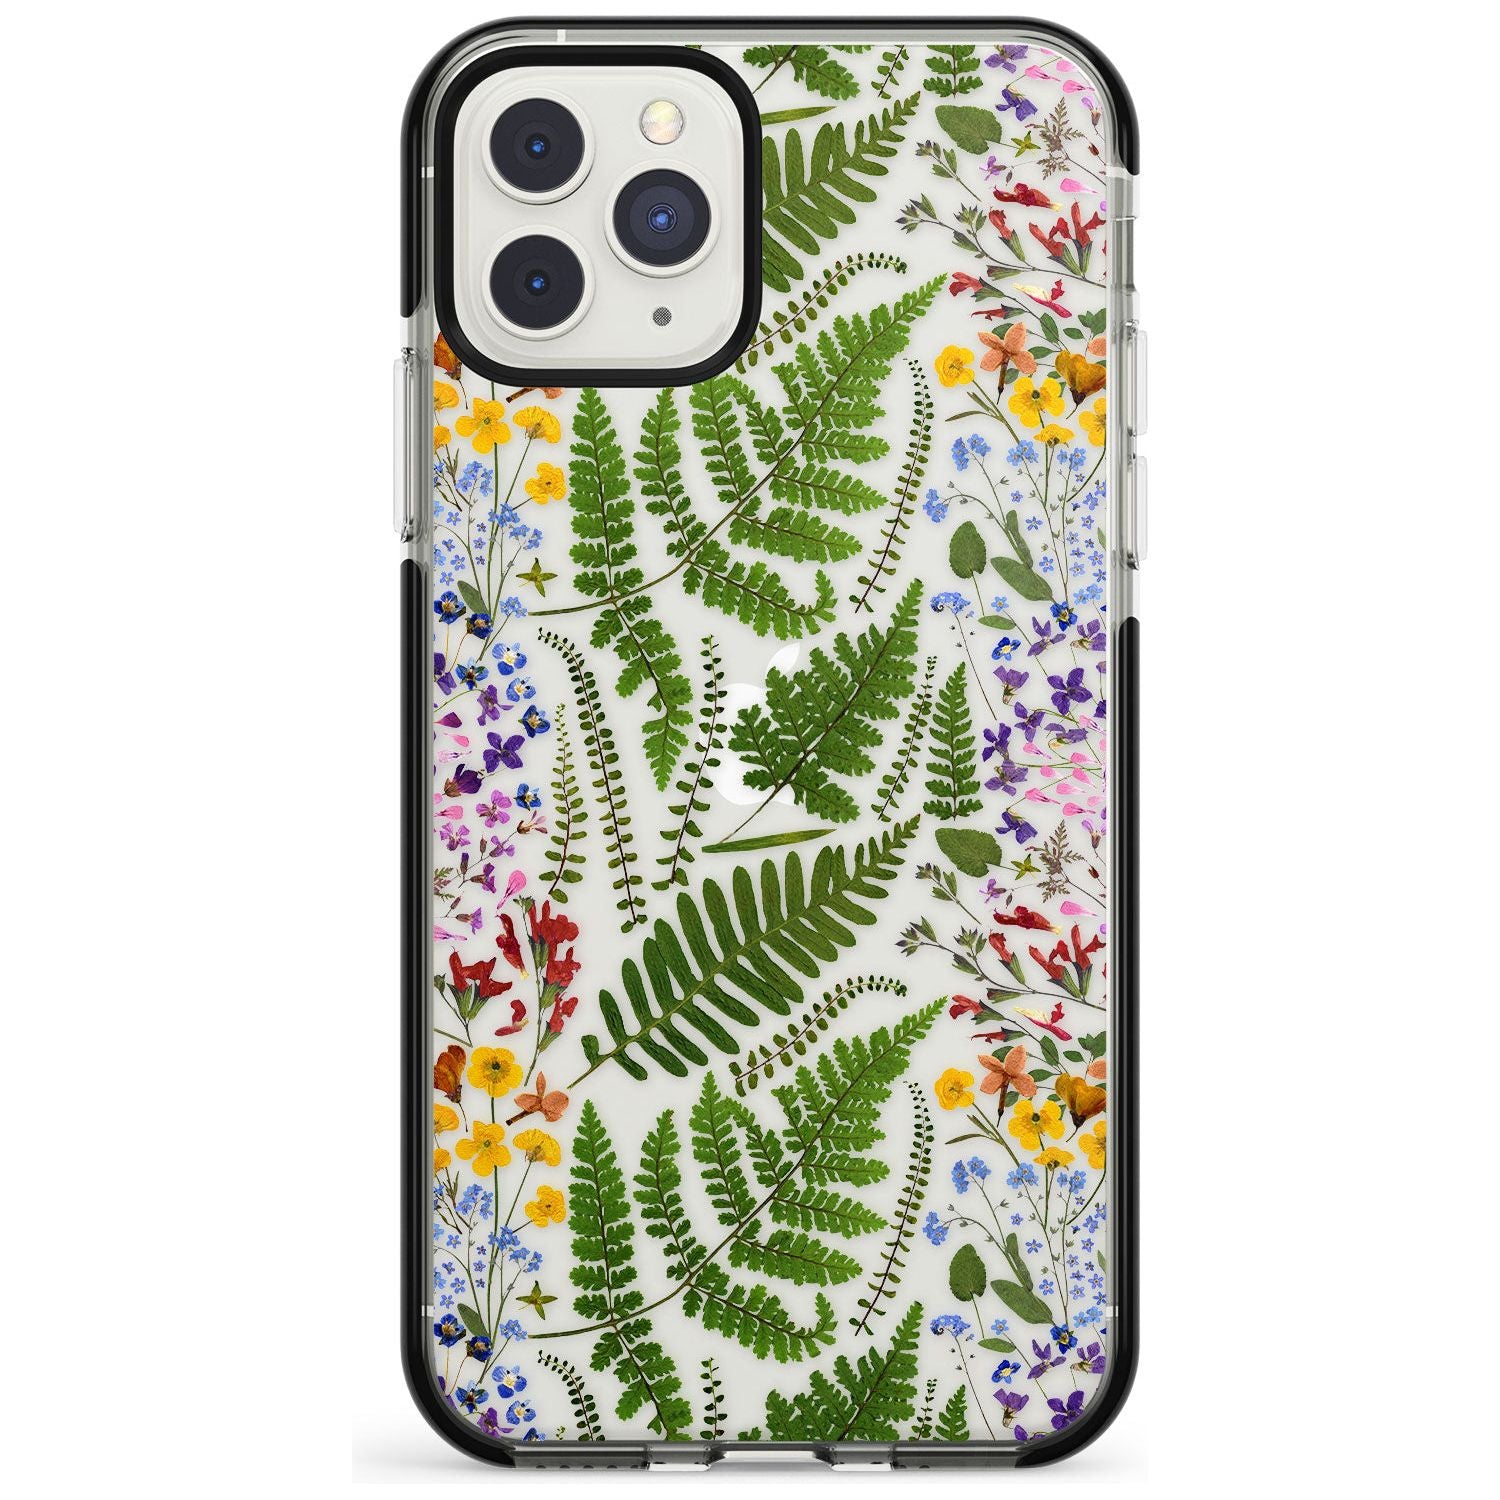 Busy Floral and Fern Design Black Impact Phone Case for iPhone 11 Pro Max